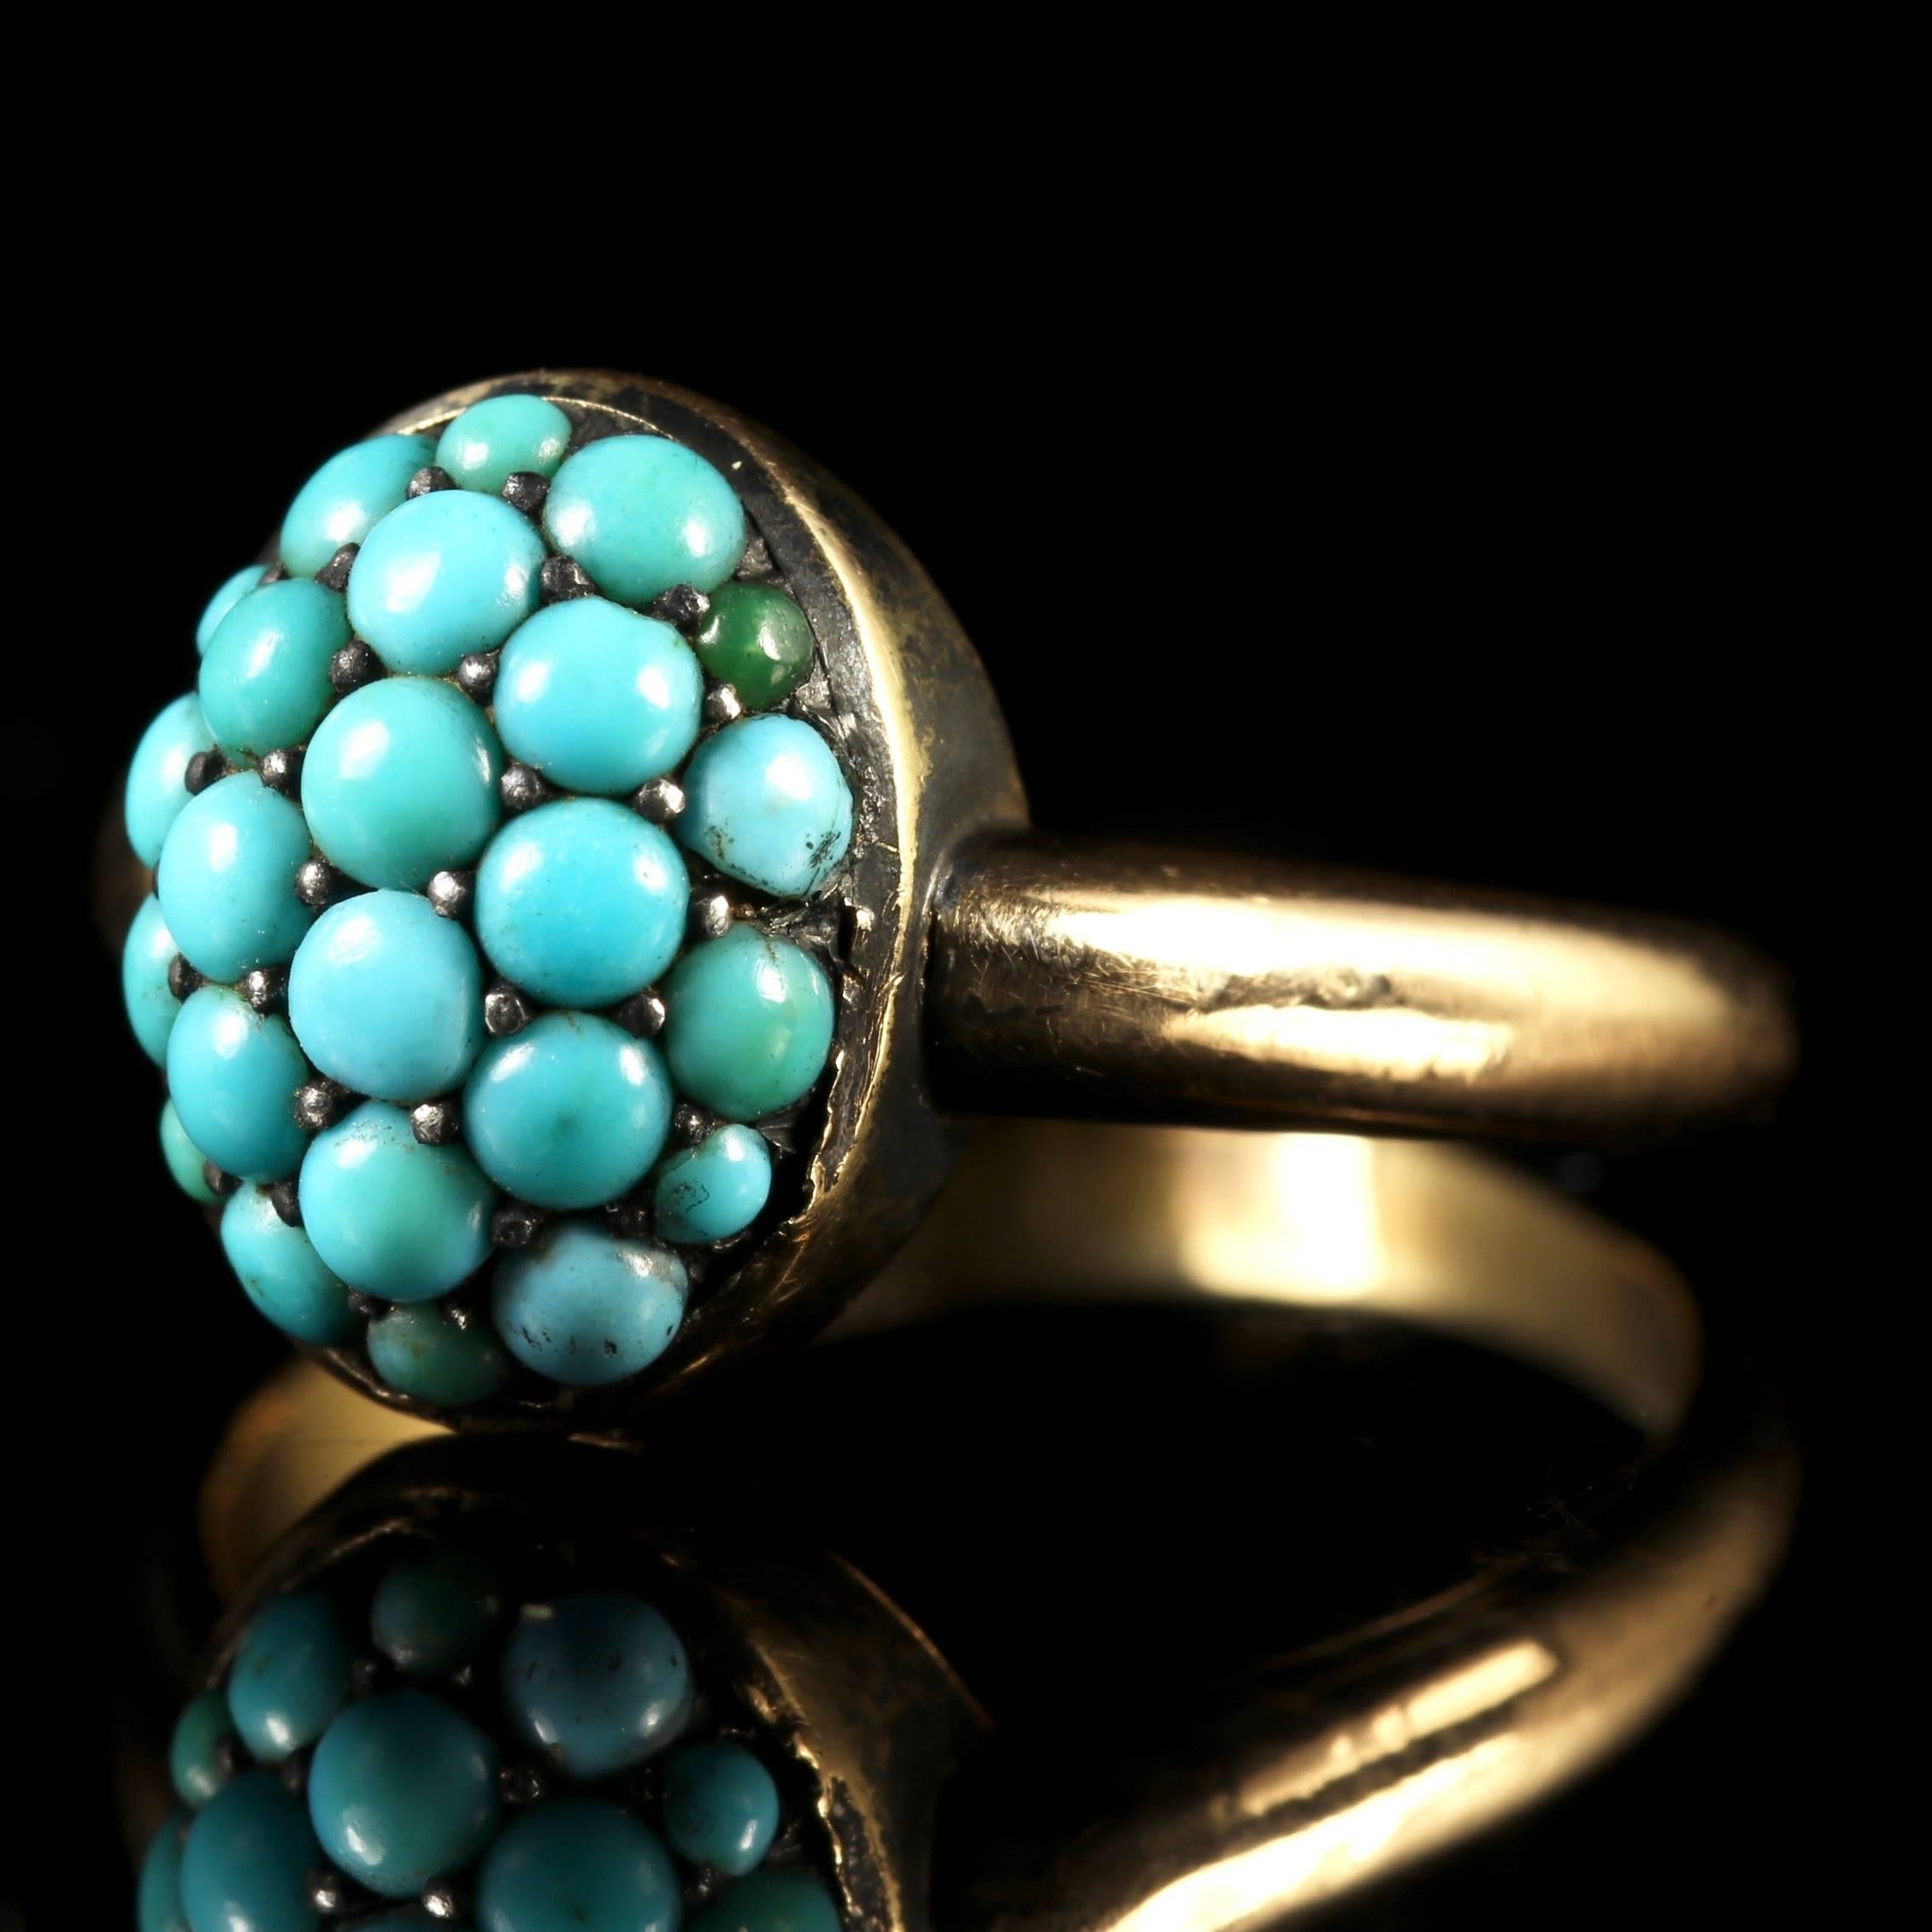 This beautiful Pavé Set Turquoise ring is set in 18ct Gold, Circa 1890.

The ring has bright Turquoise’s which graduate in size all around.

The pavé setting, pronounced “pa-vay,” comes from the French word “to pave,” such as paved in gemstones. By